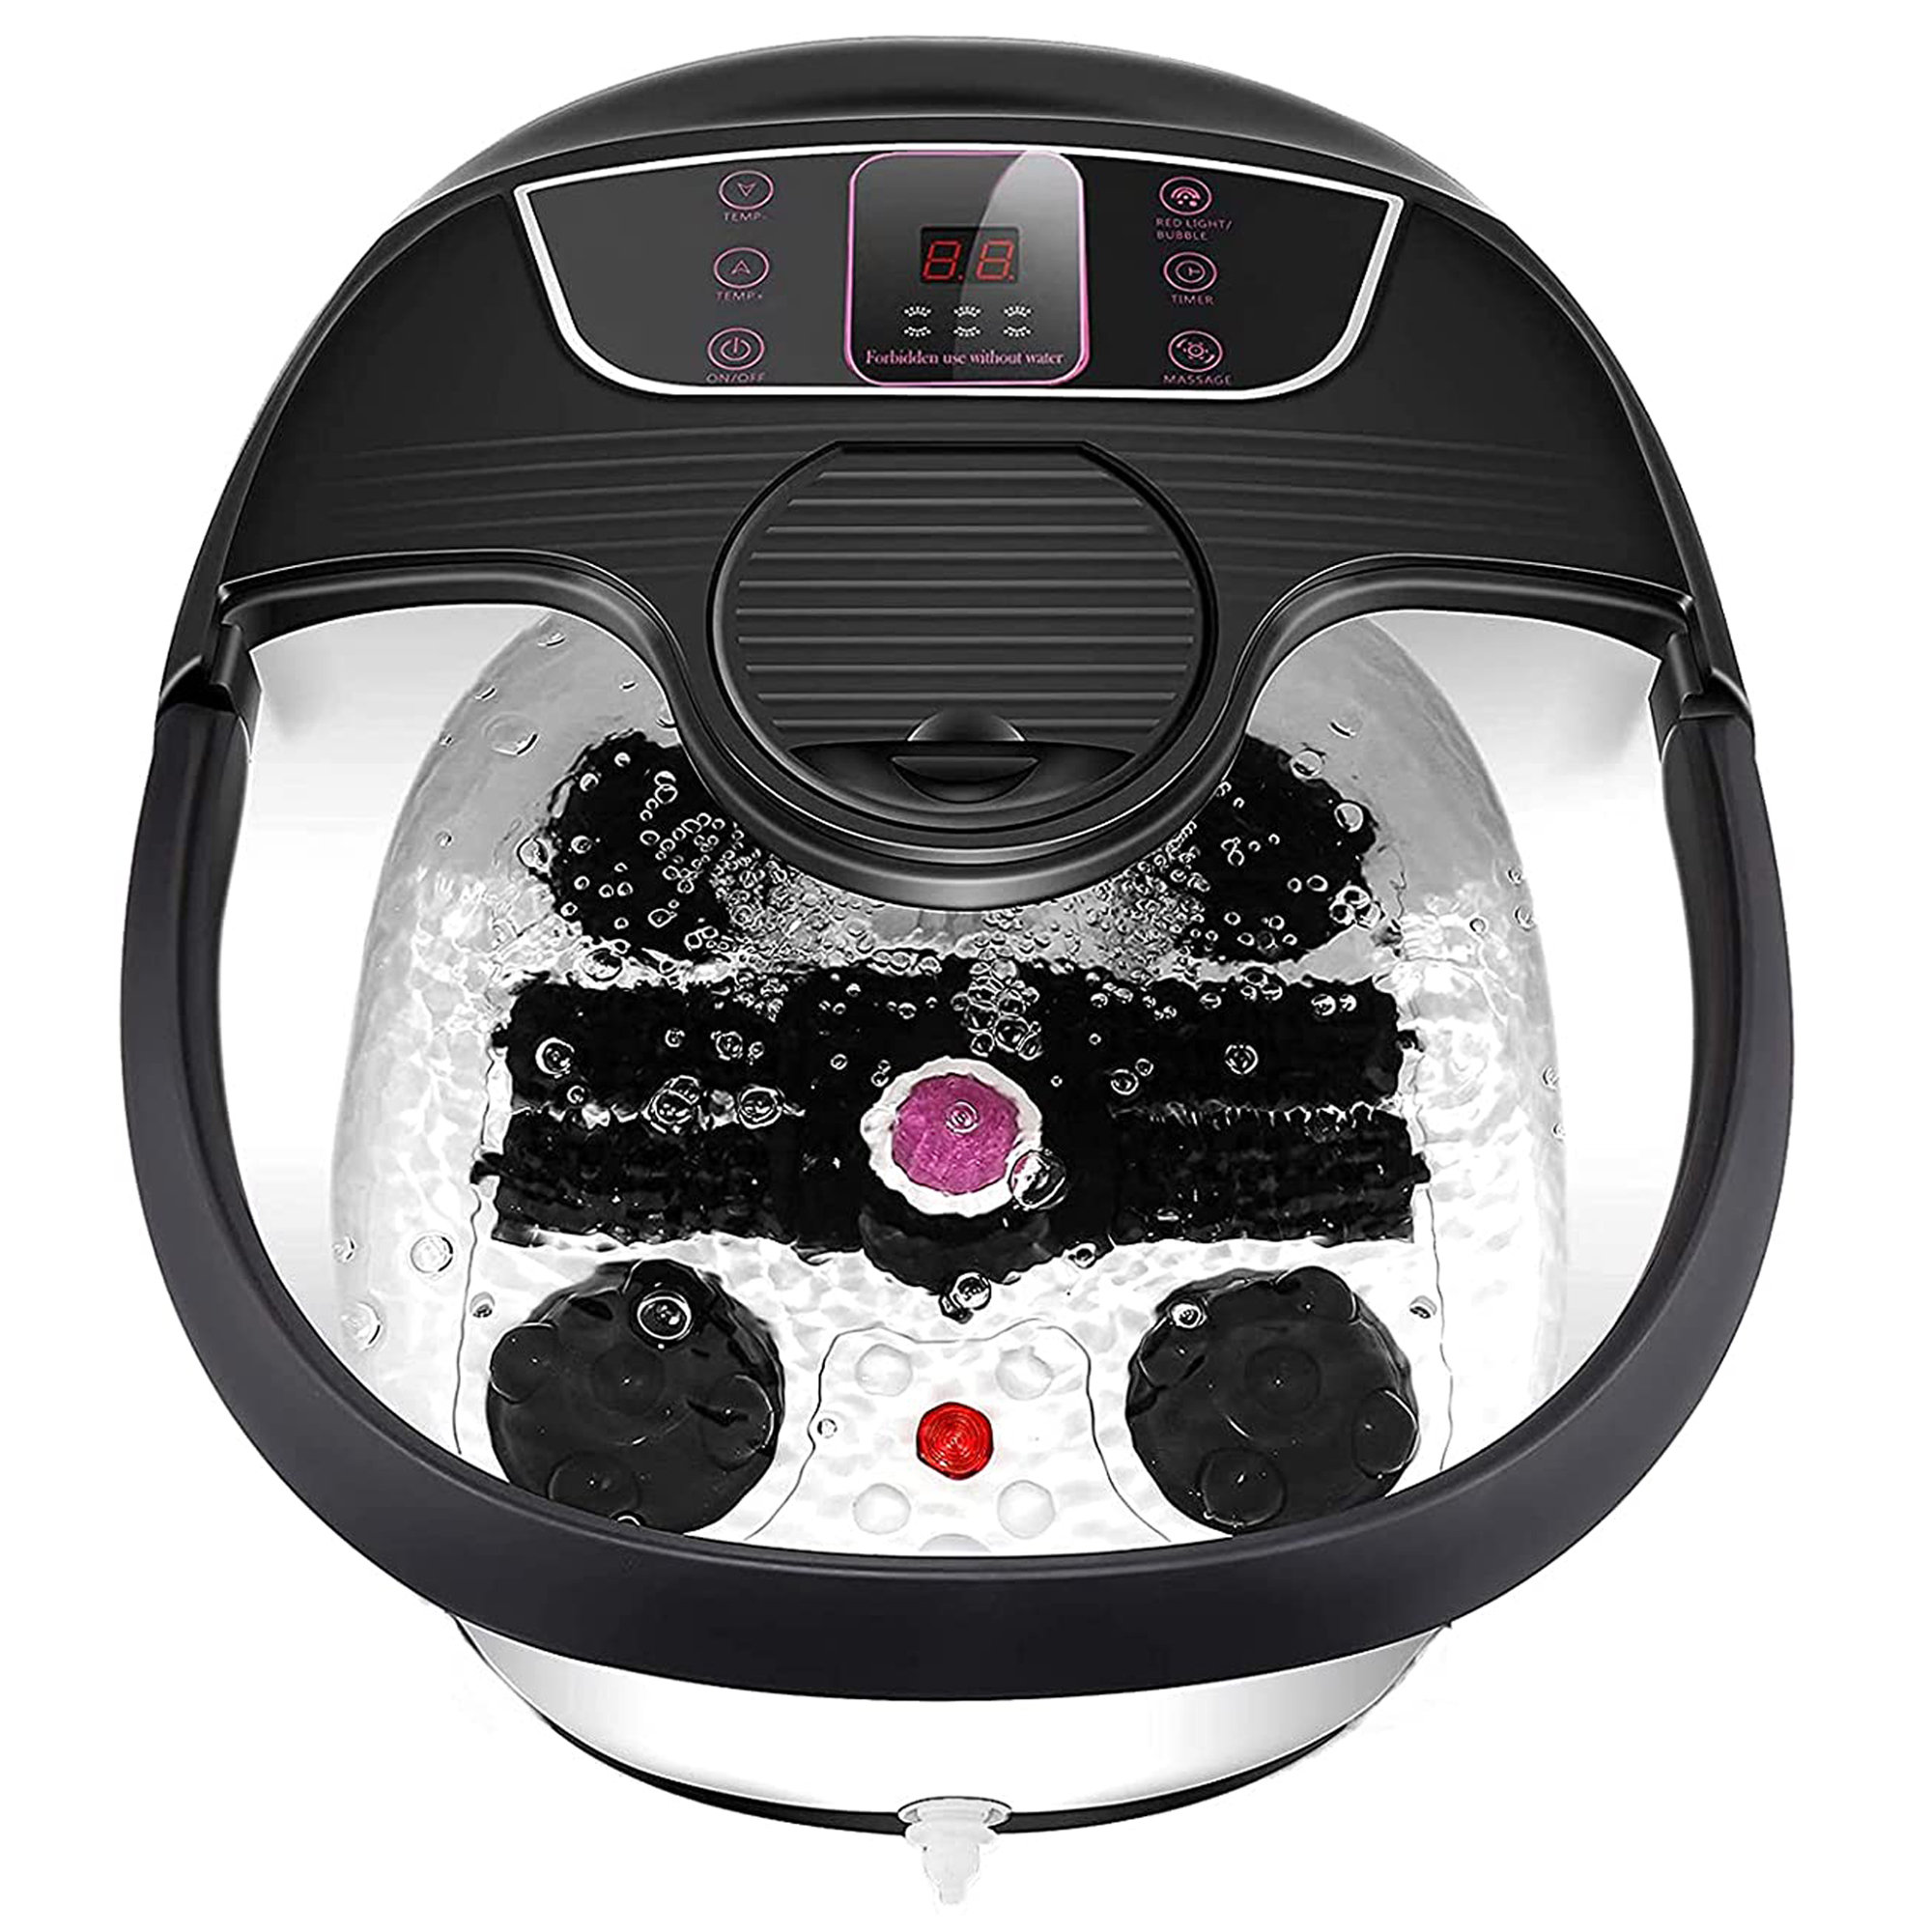 Foot Spa Bath Massager w/ Heat,Temp Control,Time Setting,Bubble Jets,Massage Rollers,Pumice Stones DreamDwell Home Color: Black/White